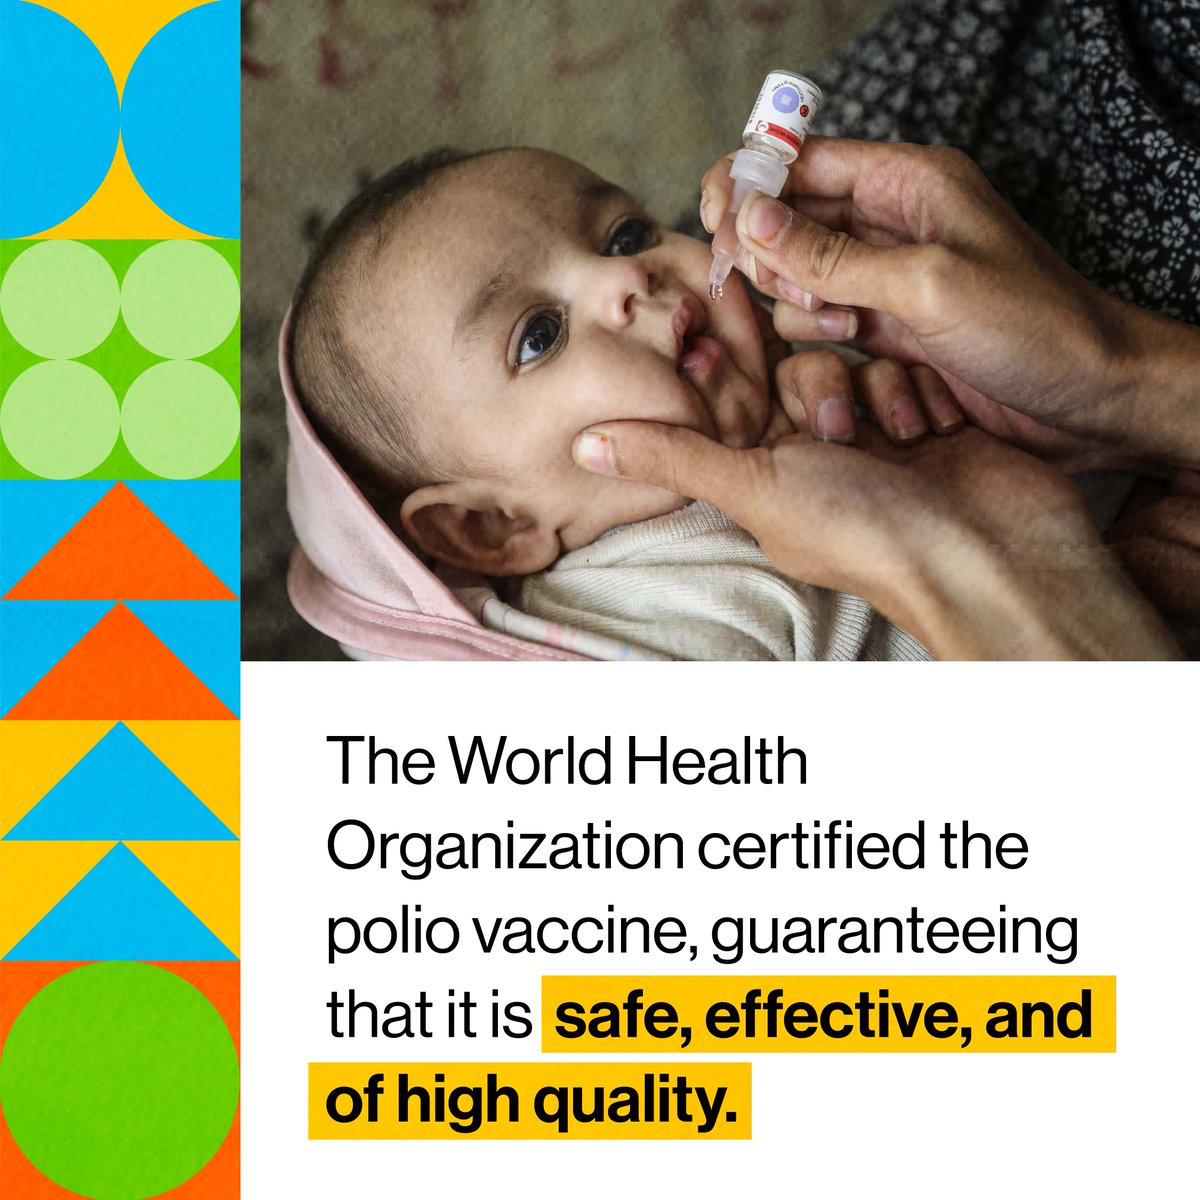 Oral polio vaccines make children’s immune systems stronger by teaching their bodies how to respond to the virus. Polio vaccines were developed based on decades of research, and they’re our best tool for keeping kids safe.